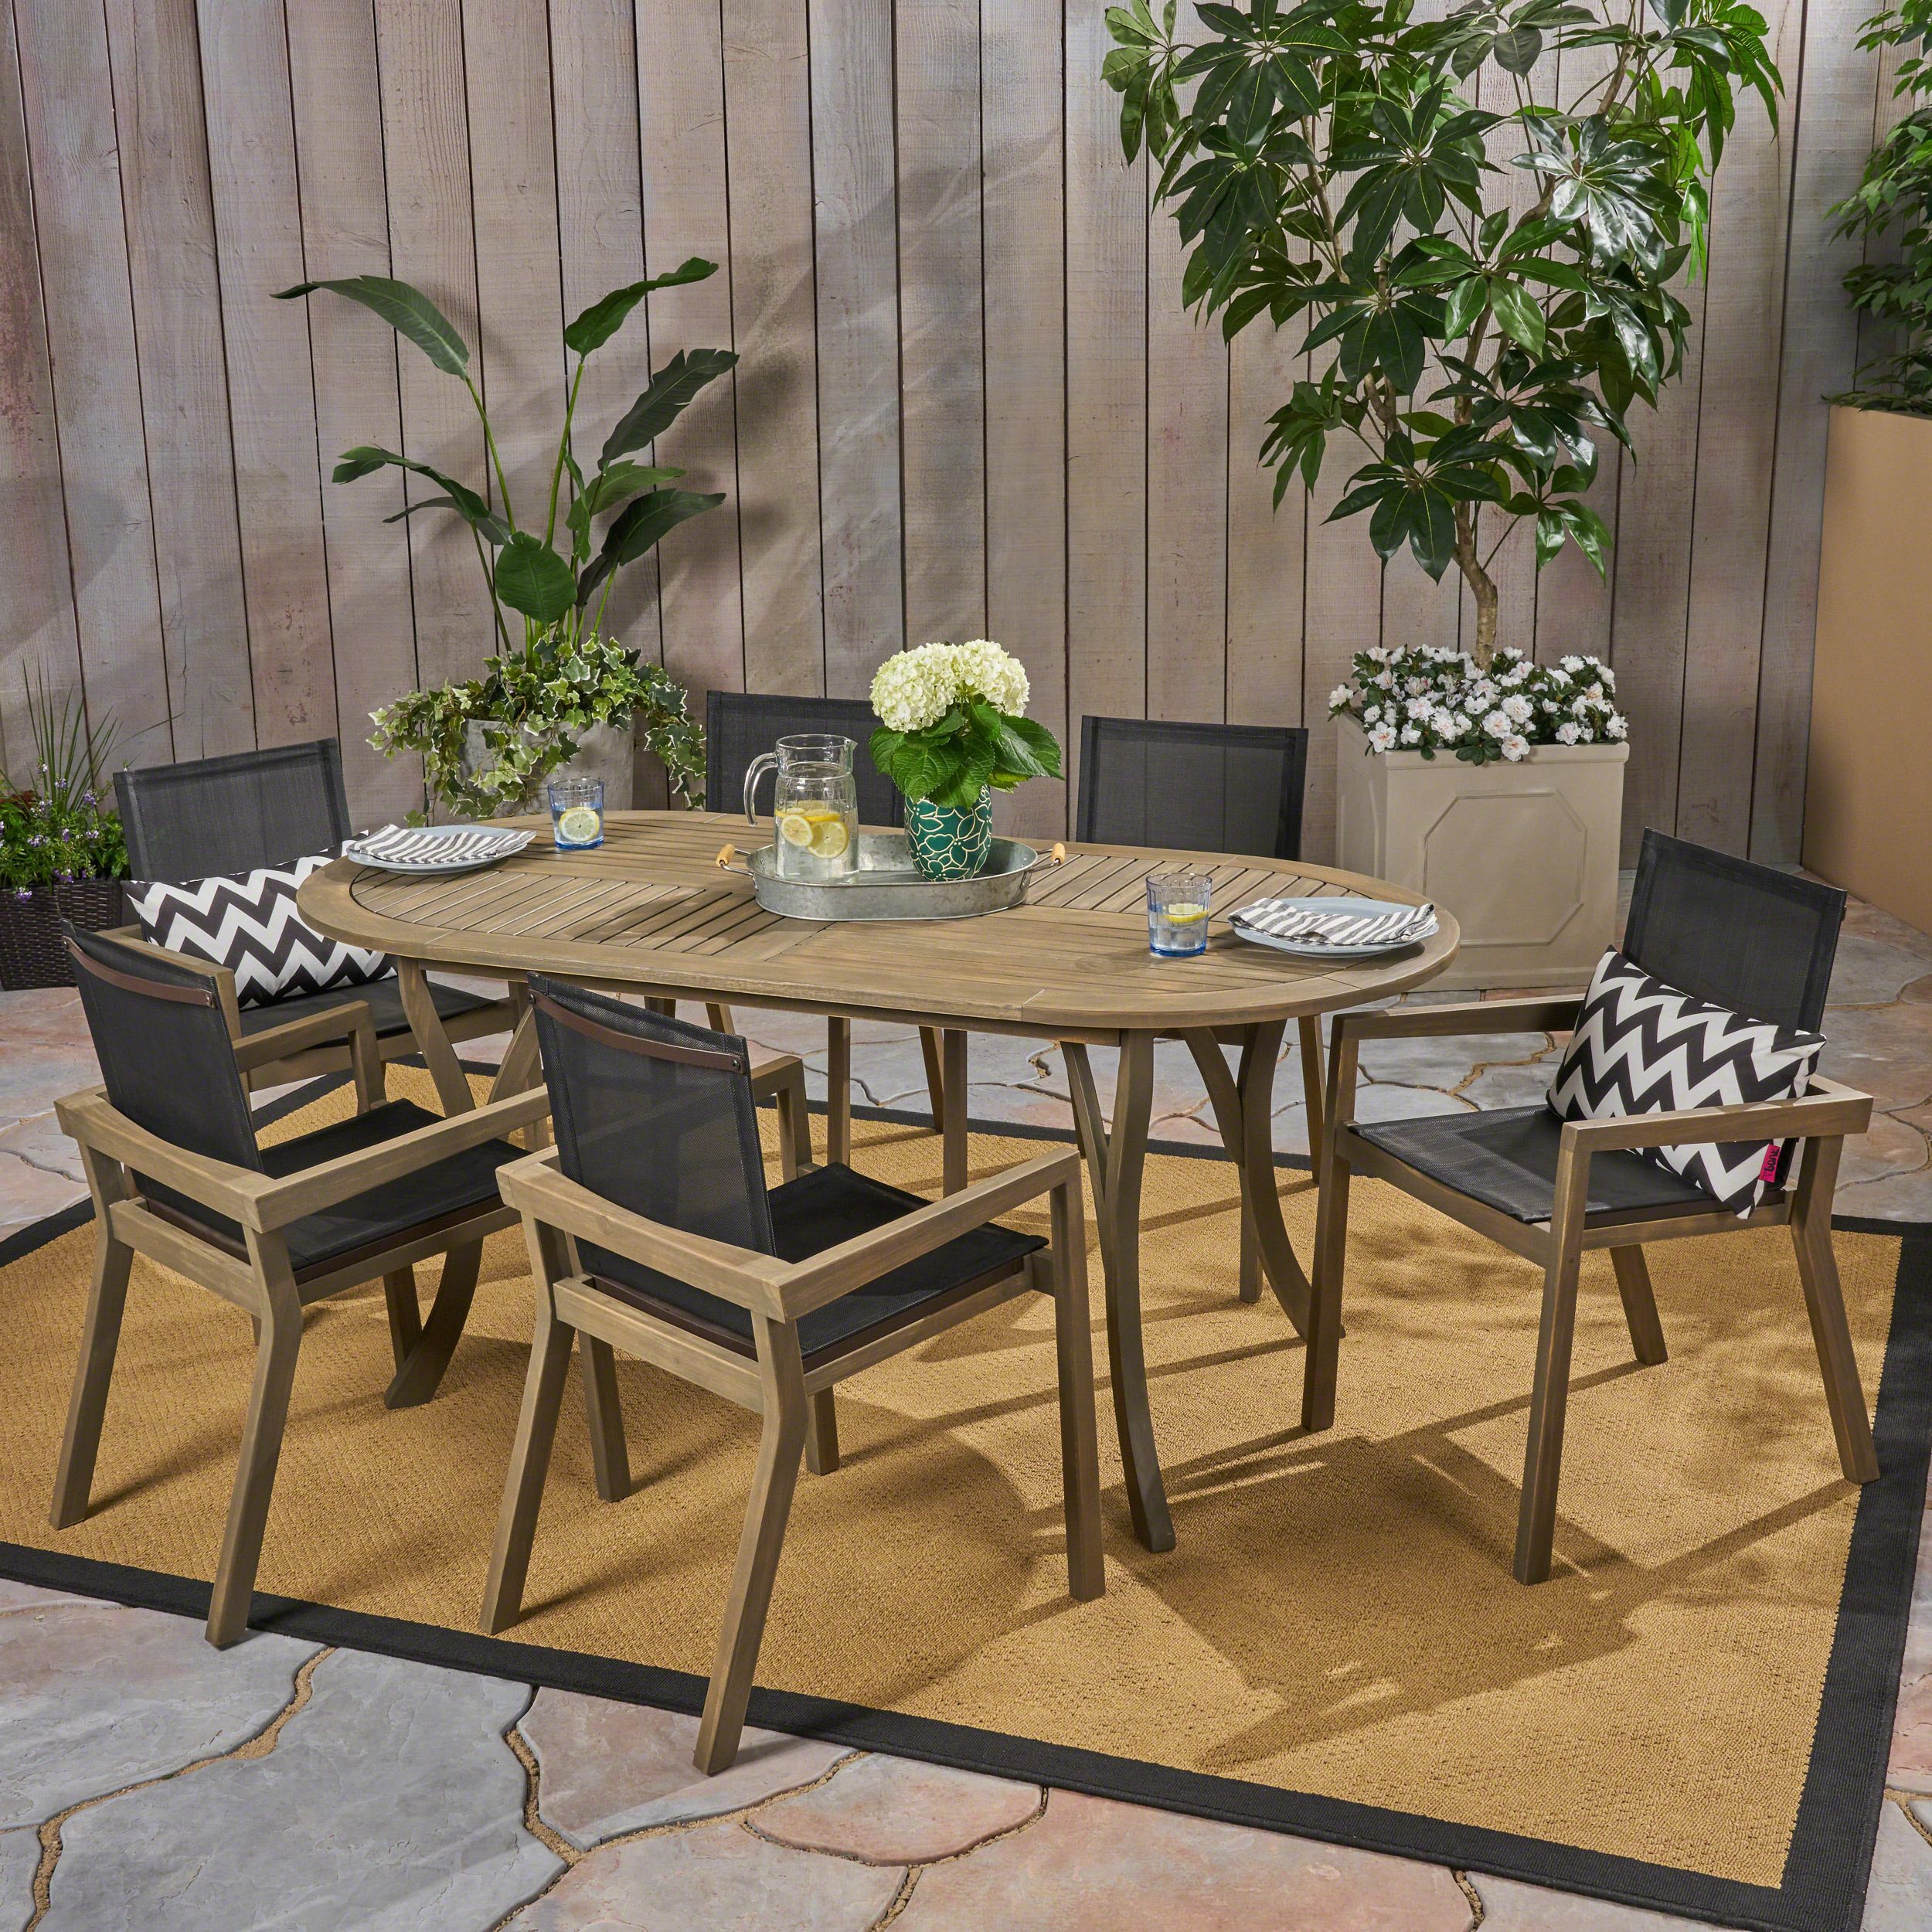 Kalani Outdoor 7 Piece Acacia Wood And Mesh Oval Dining Set, Gray Within Well Known 7 Piece Outdoor Oval Dining Sets (View 1 of 15)